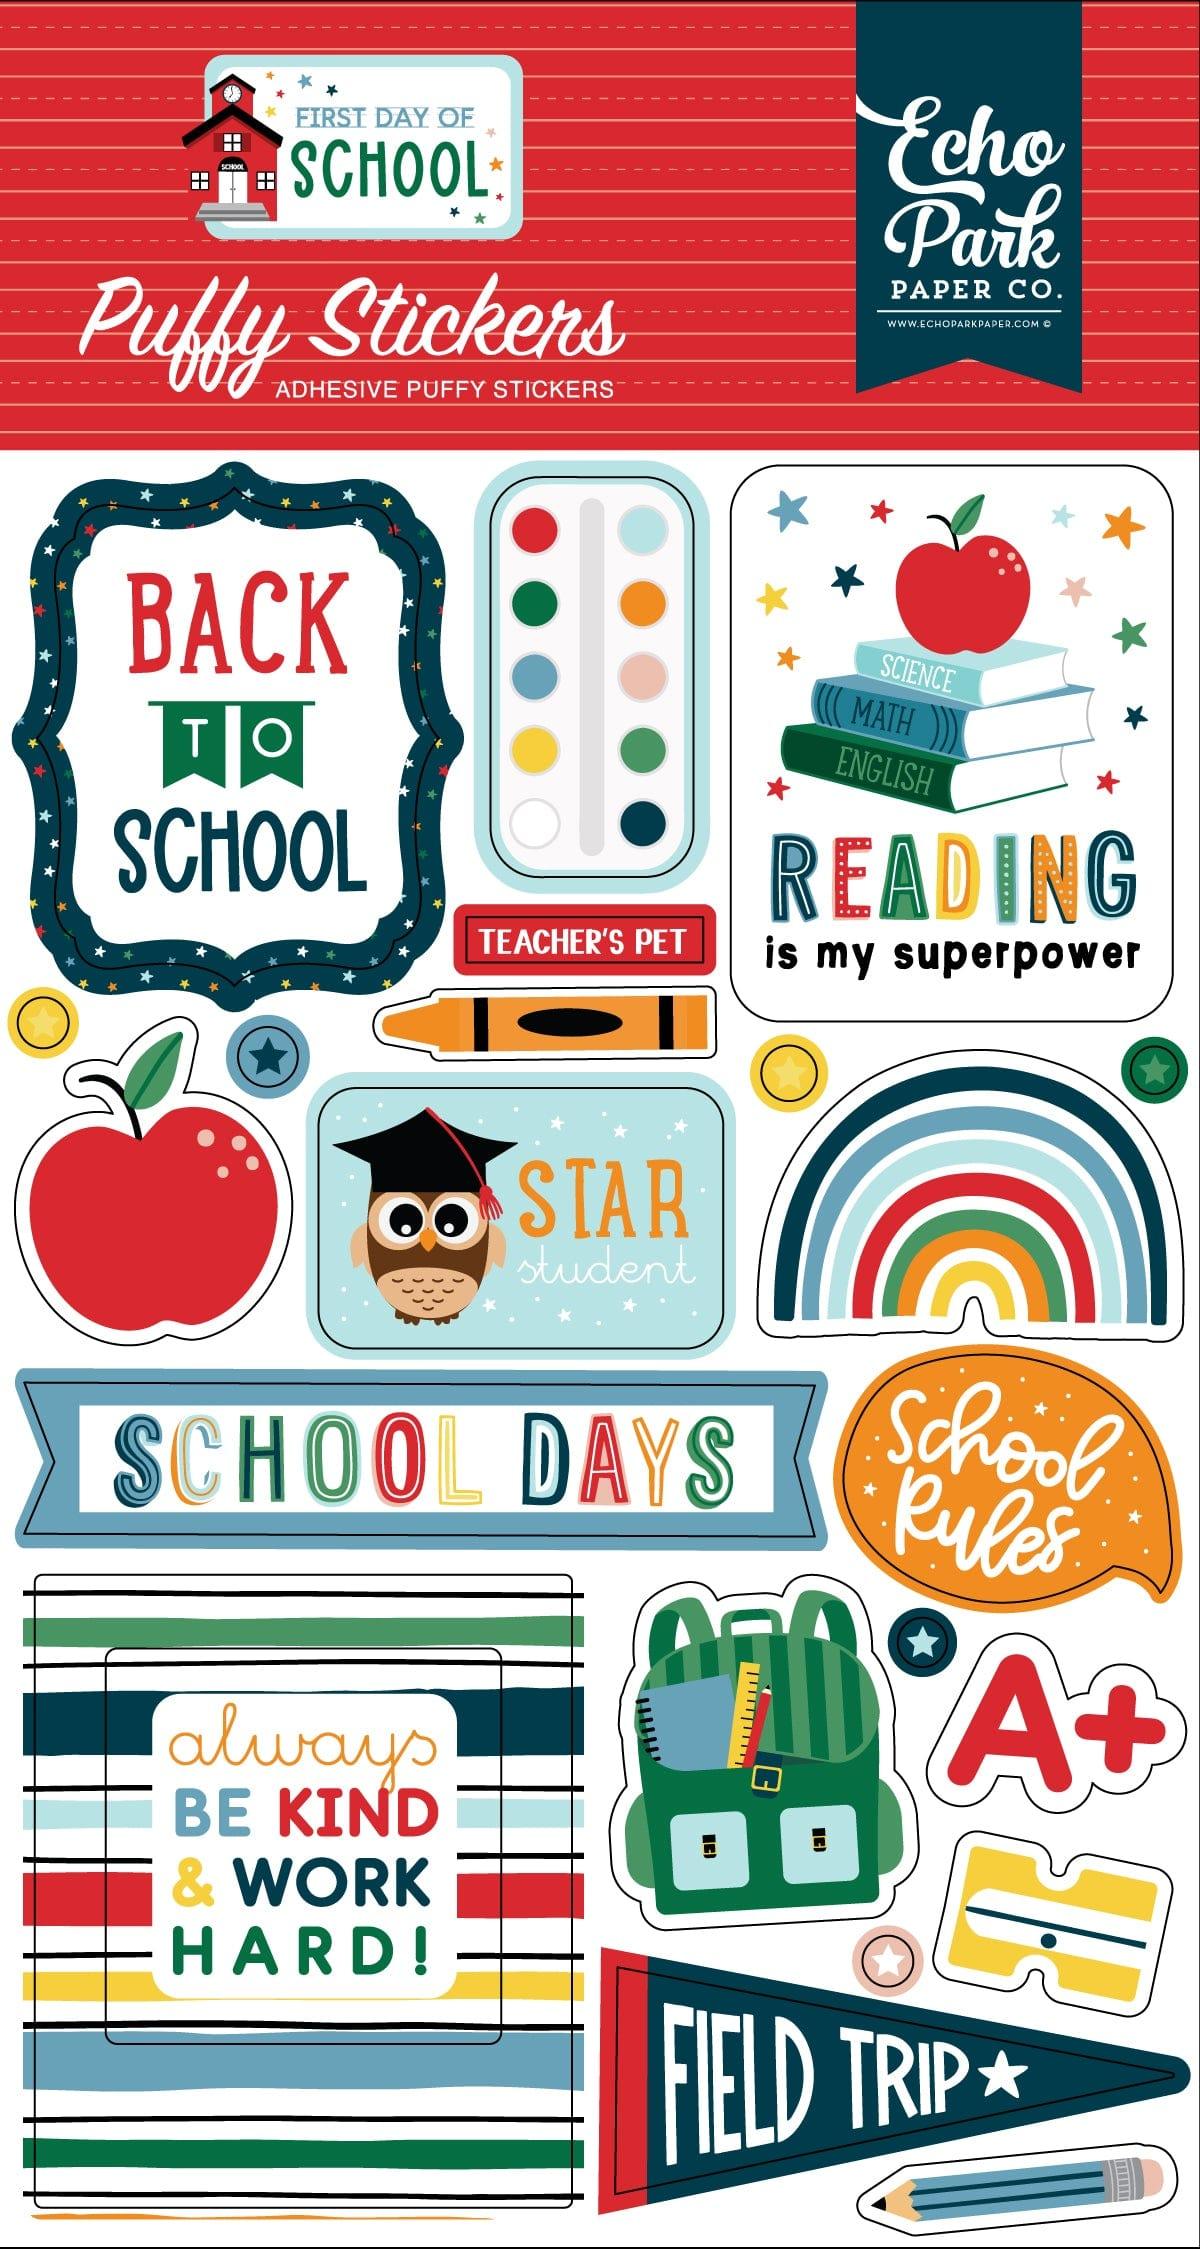 First Day of School Collection 4 x 7 Puffy Stickers Scrapbook Embellishments by Echo Park Paper - Scrapbook Supply Companies